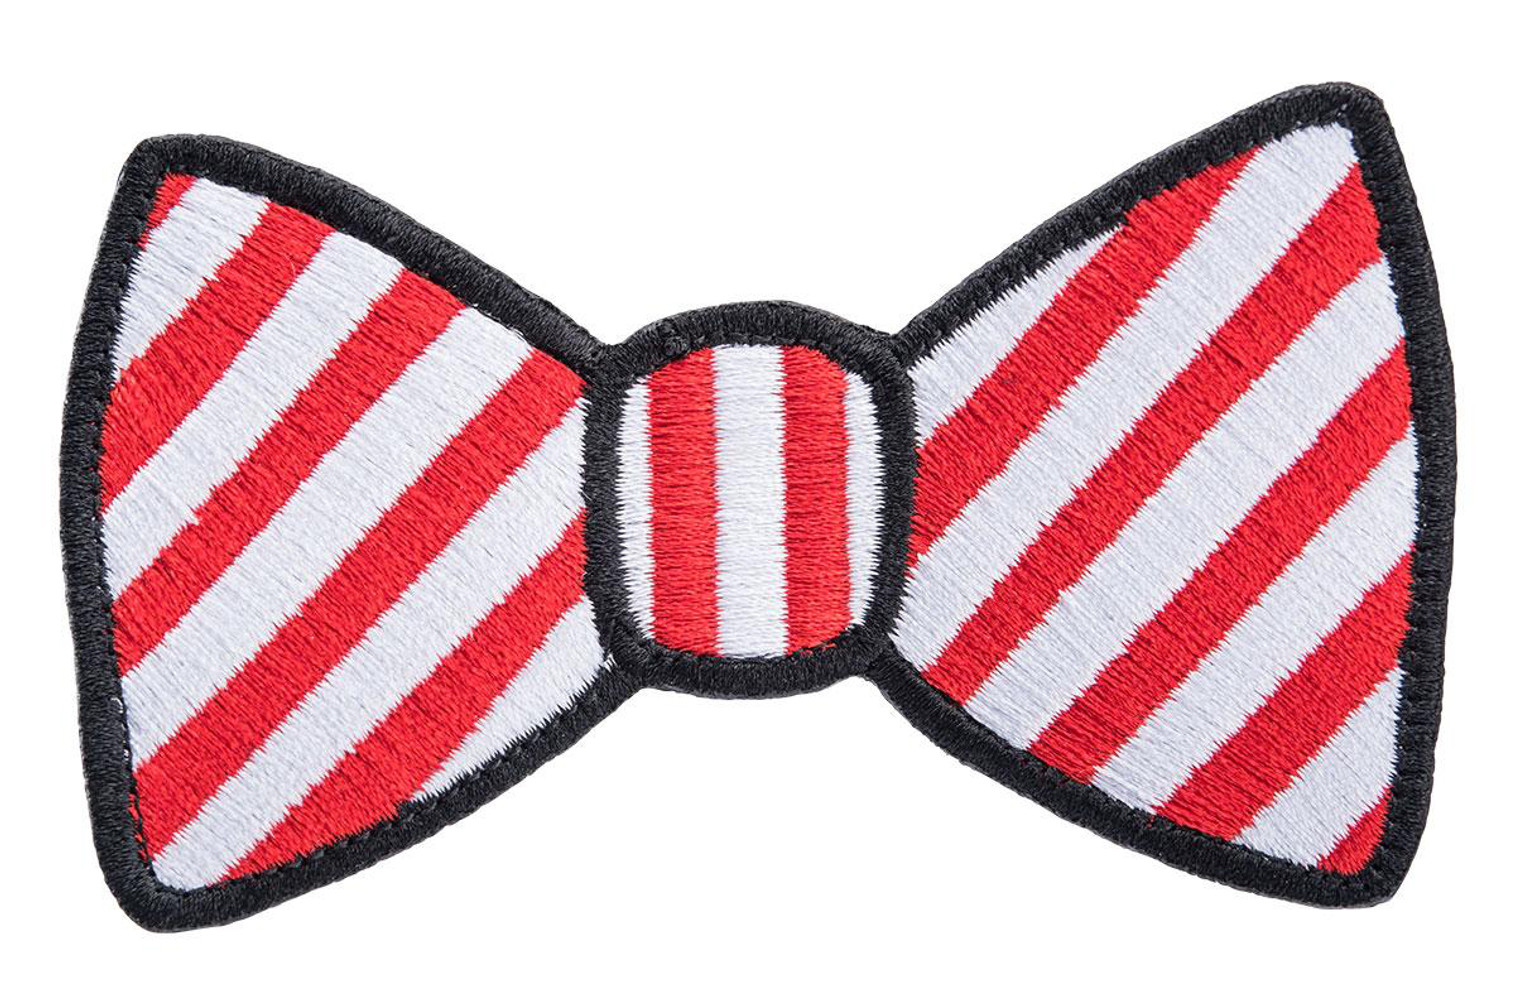 Tactical Outfitters "Bow Tie" Embroidered Morale Patch (Color: Red & White Stripe)